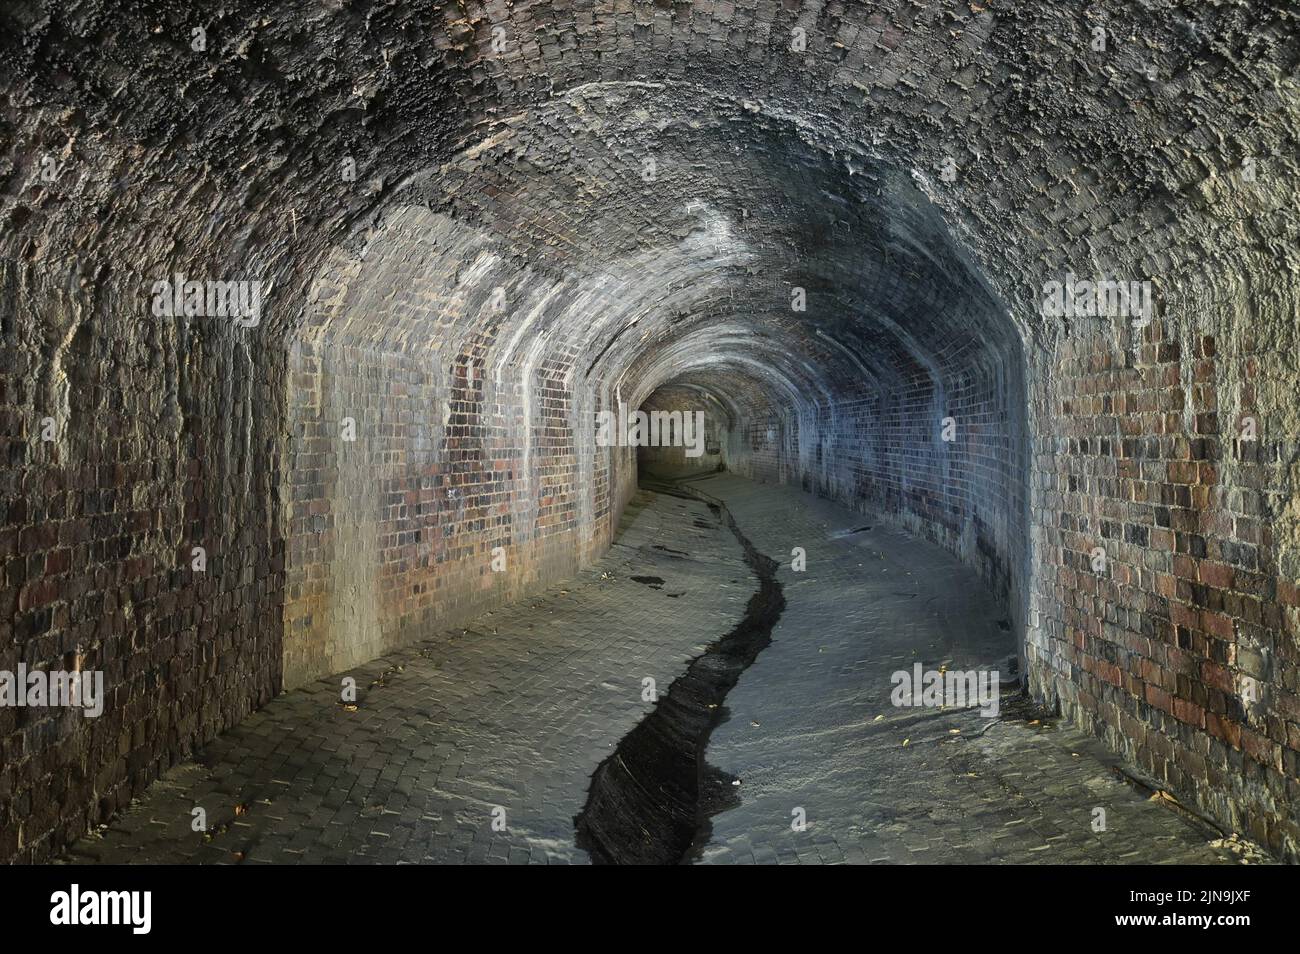 Digbeth, Birmingham, England, August 10th 2022. - These Victorian tunnels have been revealed as water levels dropped vastly in Birmingham city centre. The underground culvert was constructed in 1890 to divert the River Rea through Birmingham's industrial centre. Today the culvert acts as a storm drain, during wet weather it rises as high as the ceiling. Despite the searing hot temperatures outside it is very cool underground. Pic by Credit: Sam Holiday/Alamy Live News Stock Photo